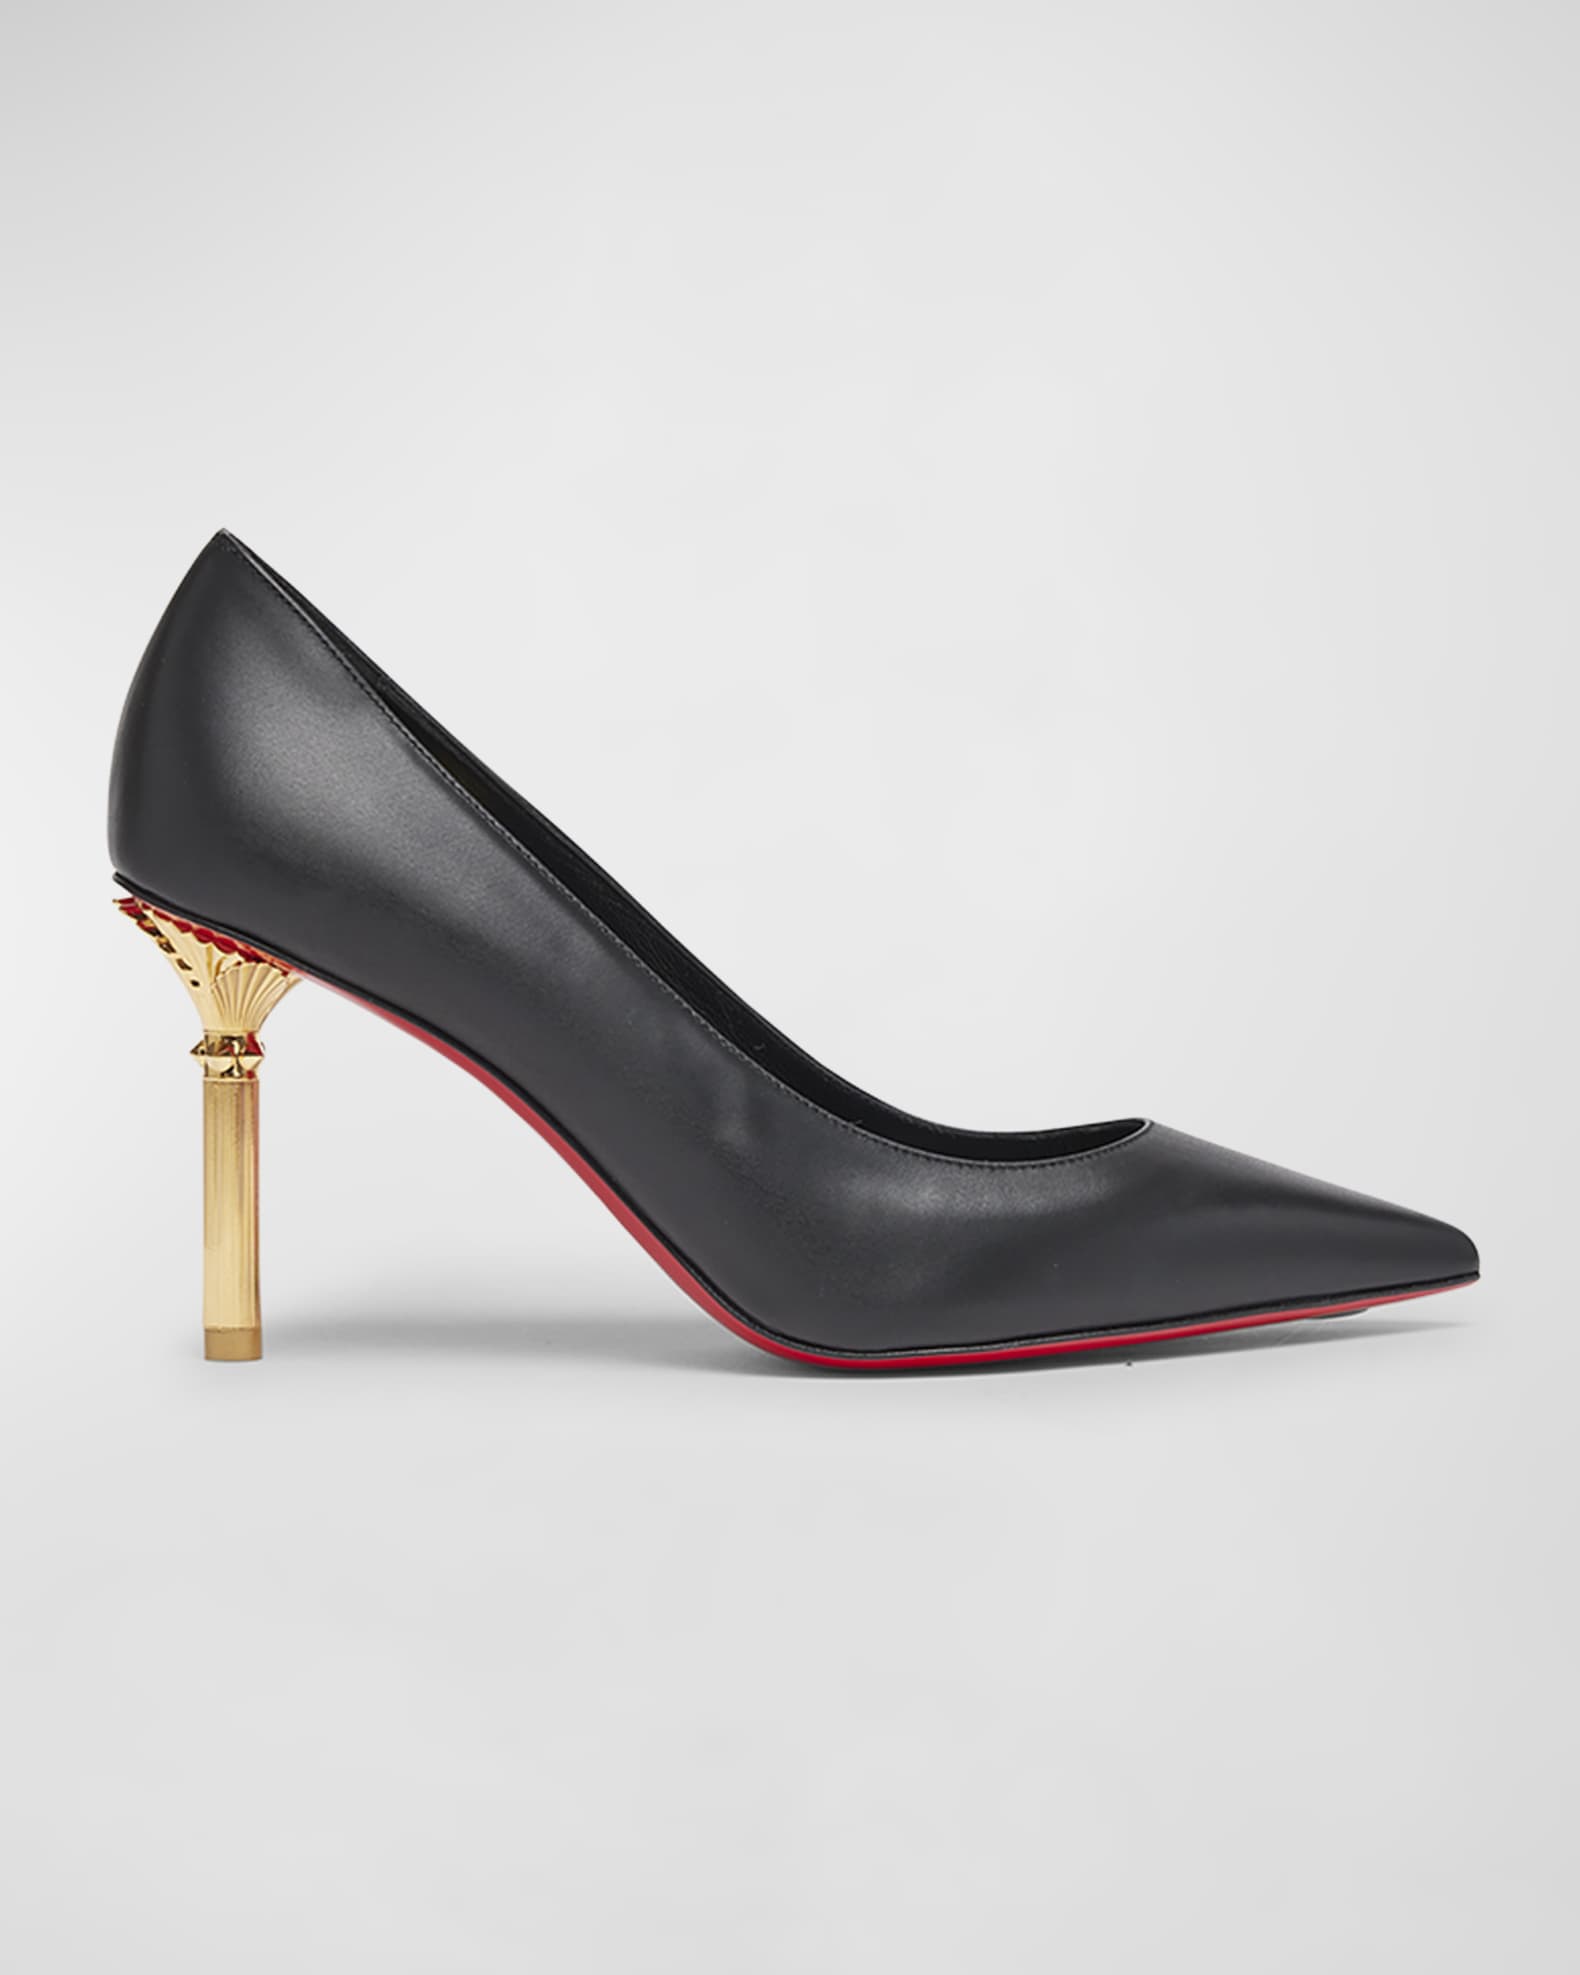 Lacquered women's black work boots with a red sole